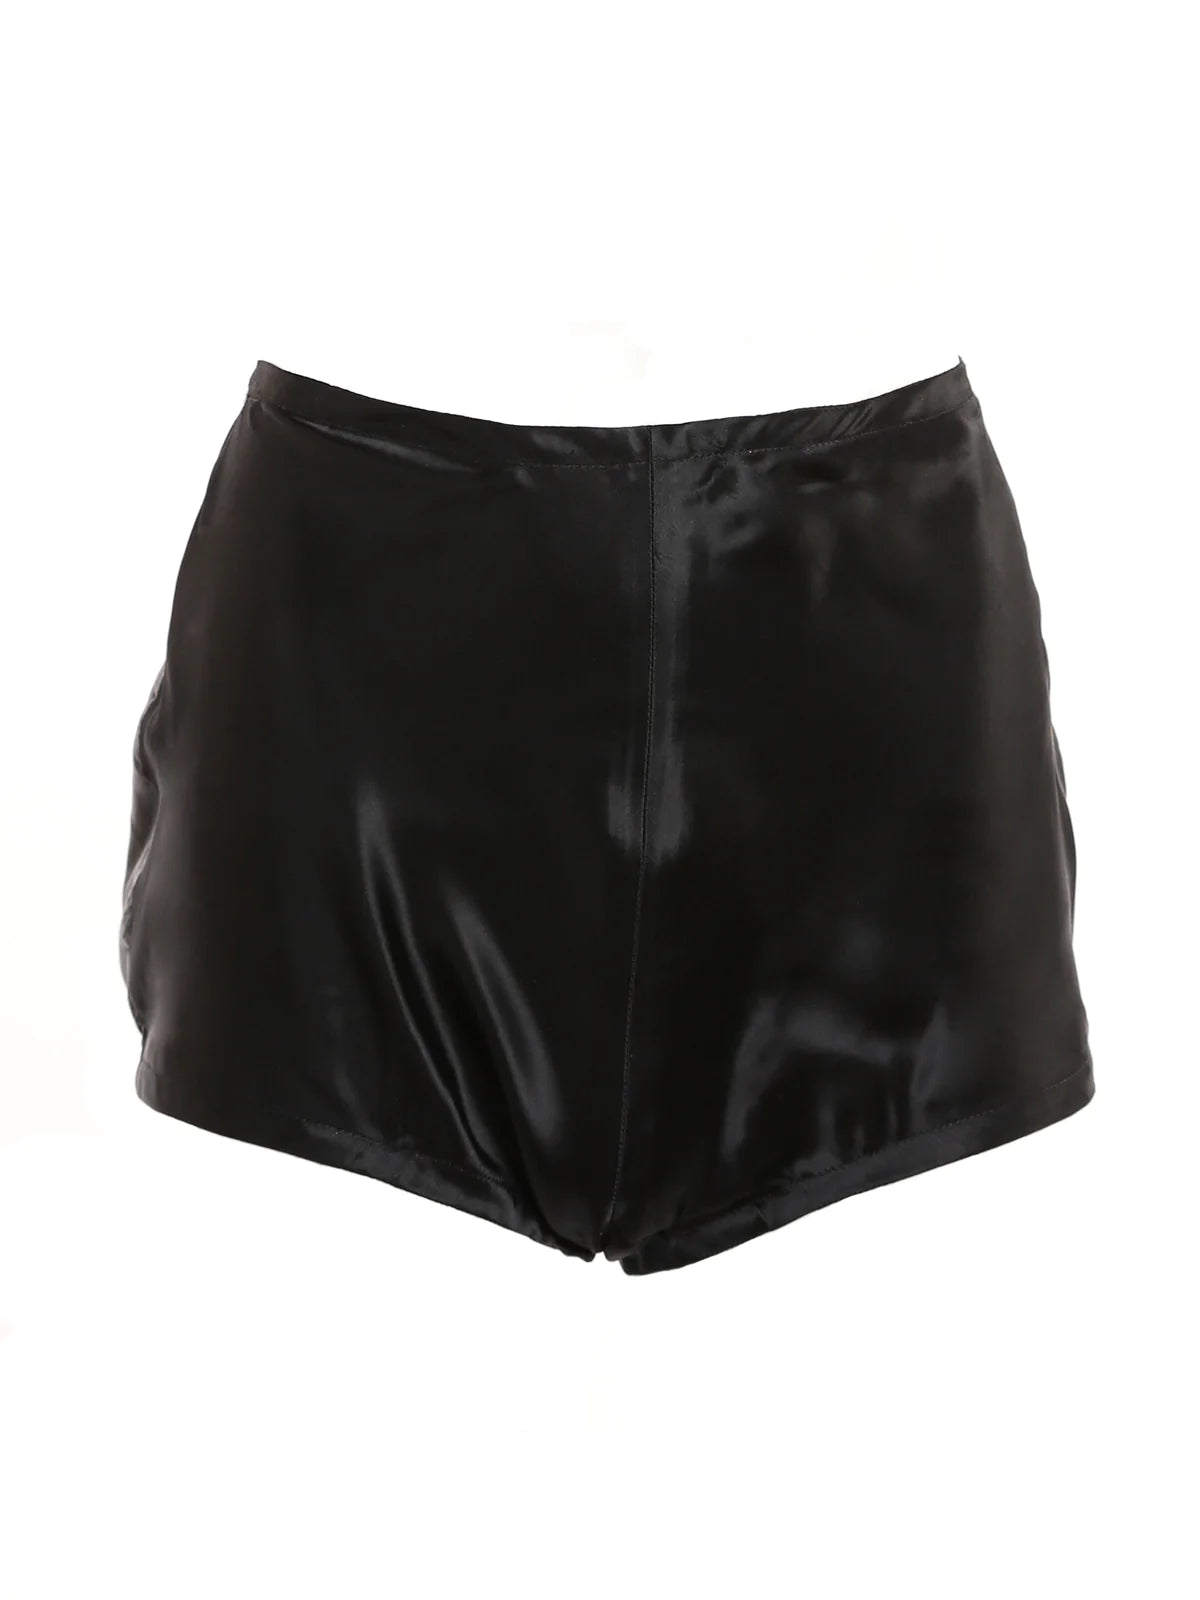 Assiette Satin Bloomers - Black and Peach - sizes S-5X